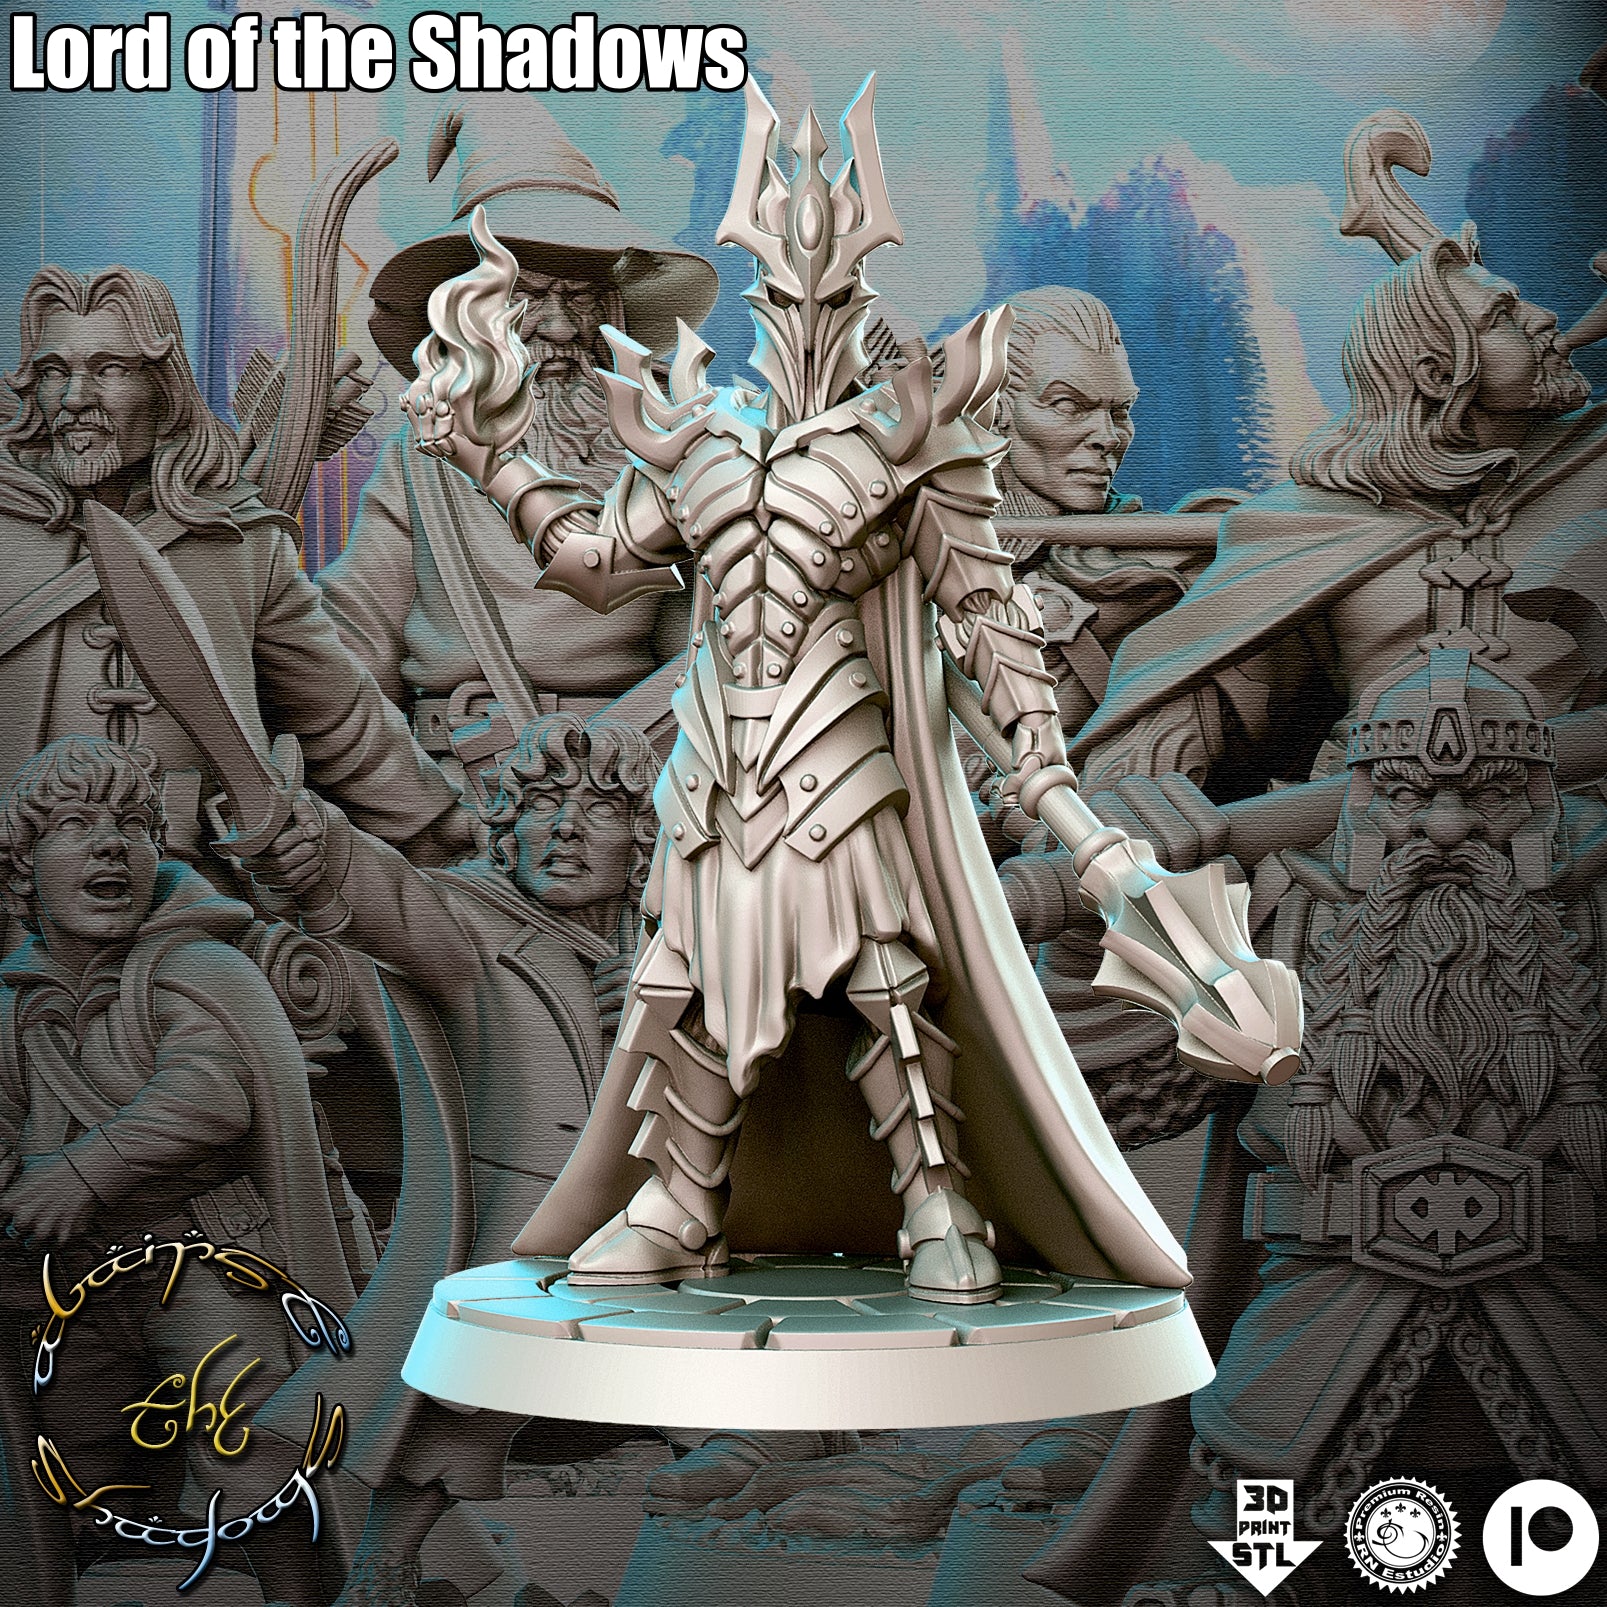 Lord of the Shadows - Against the Shadows - Green Wildling Miniatures